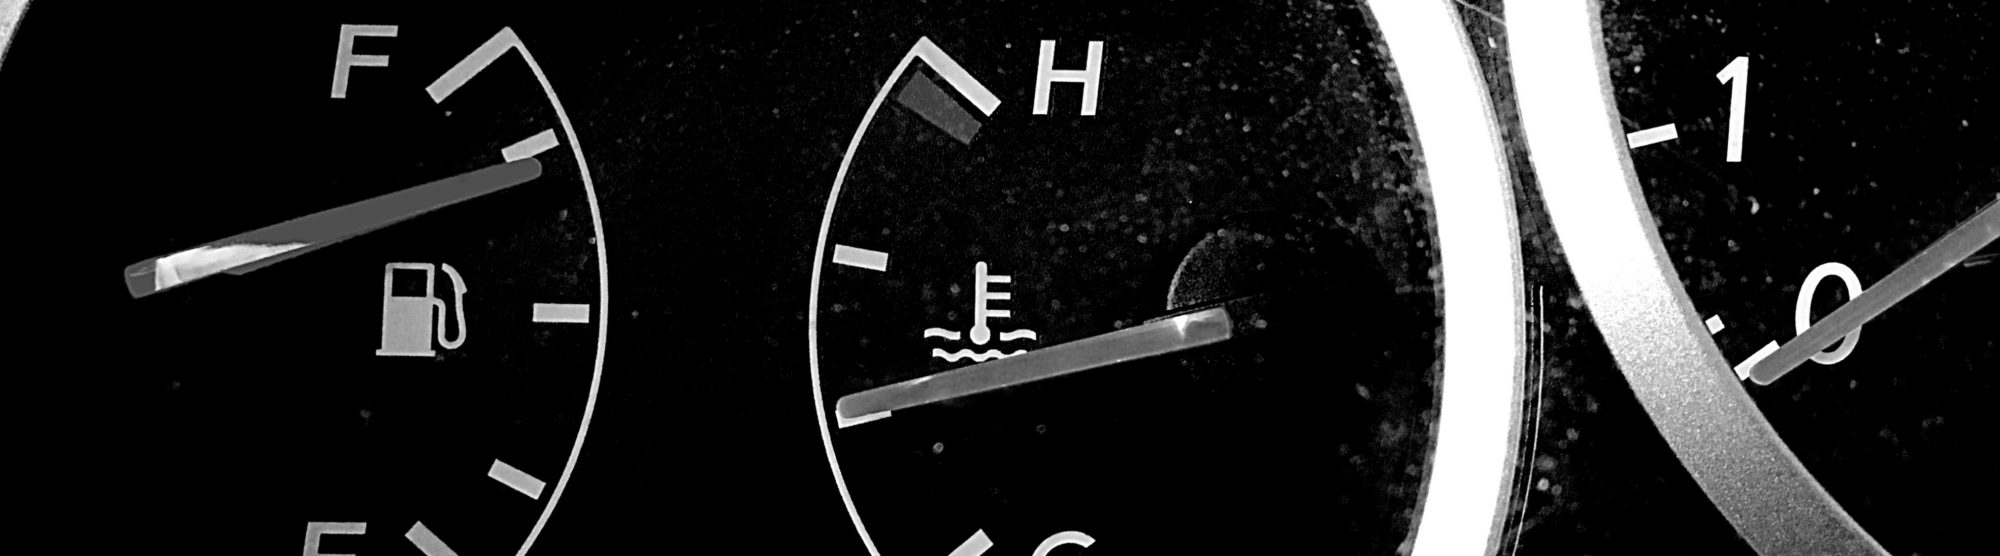 image of a car dashboard, showing the various gauges and fuel icon